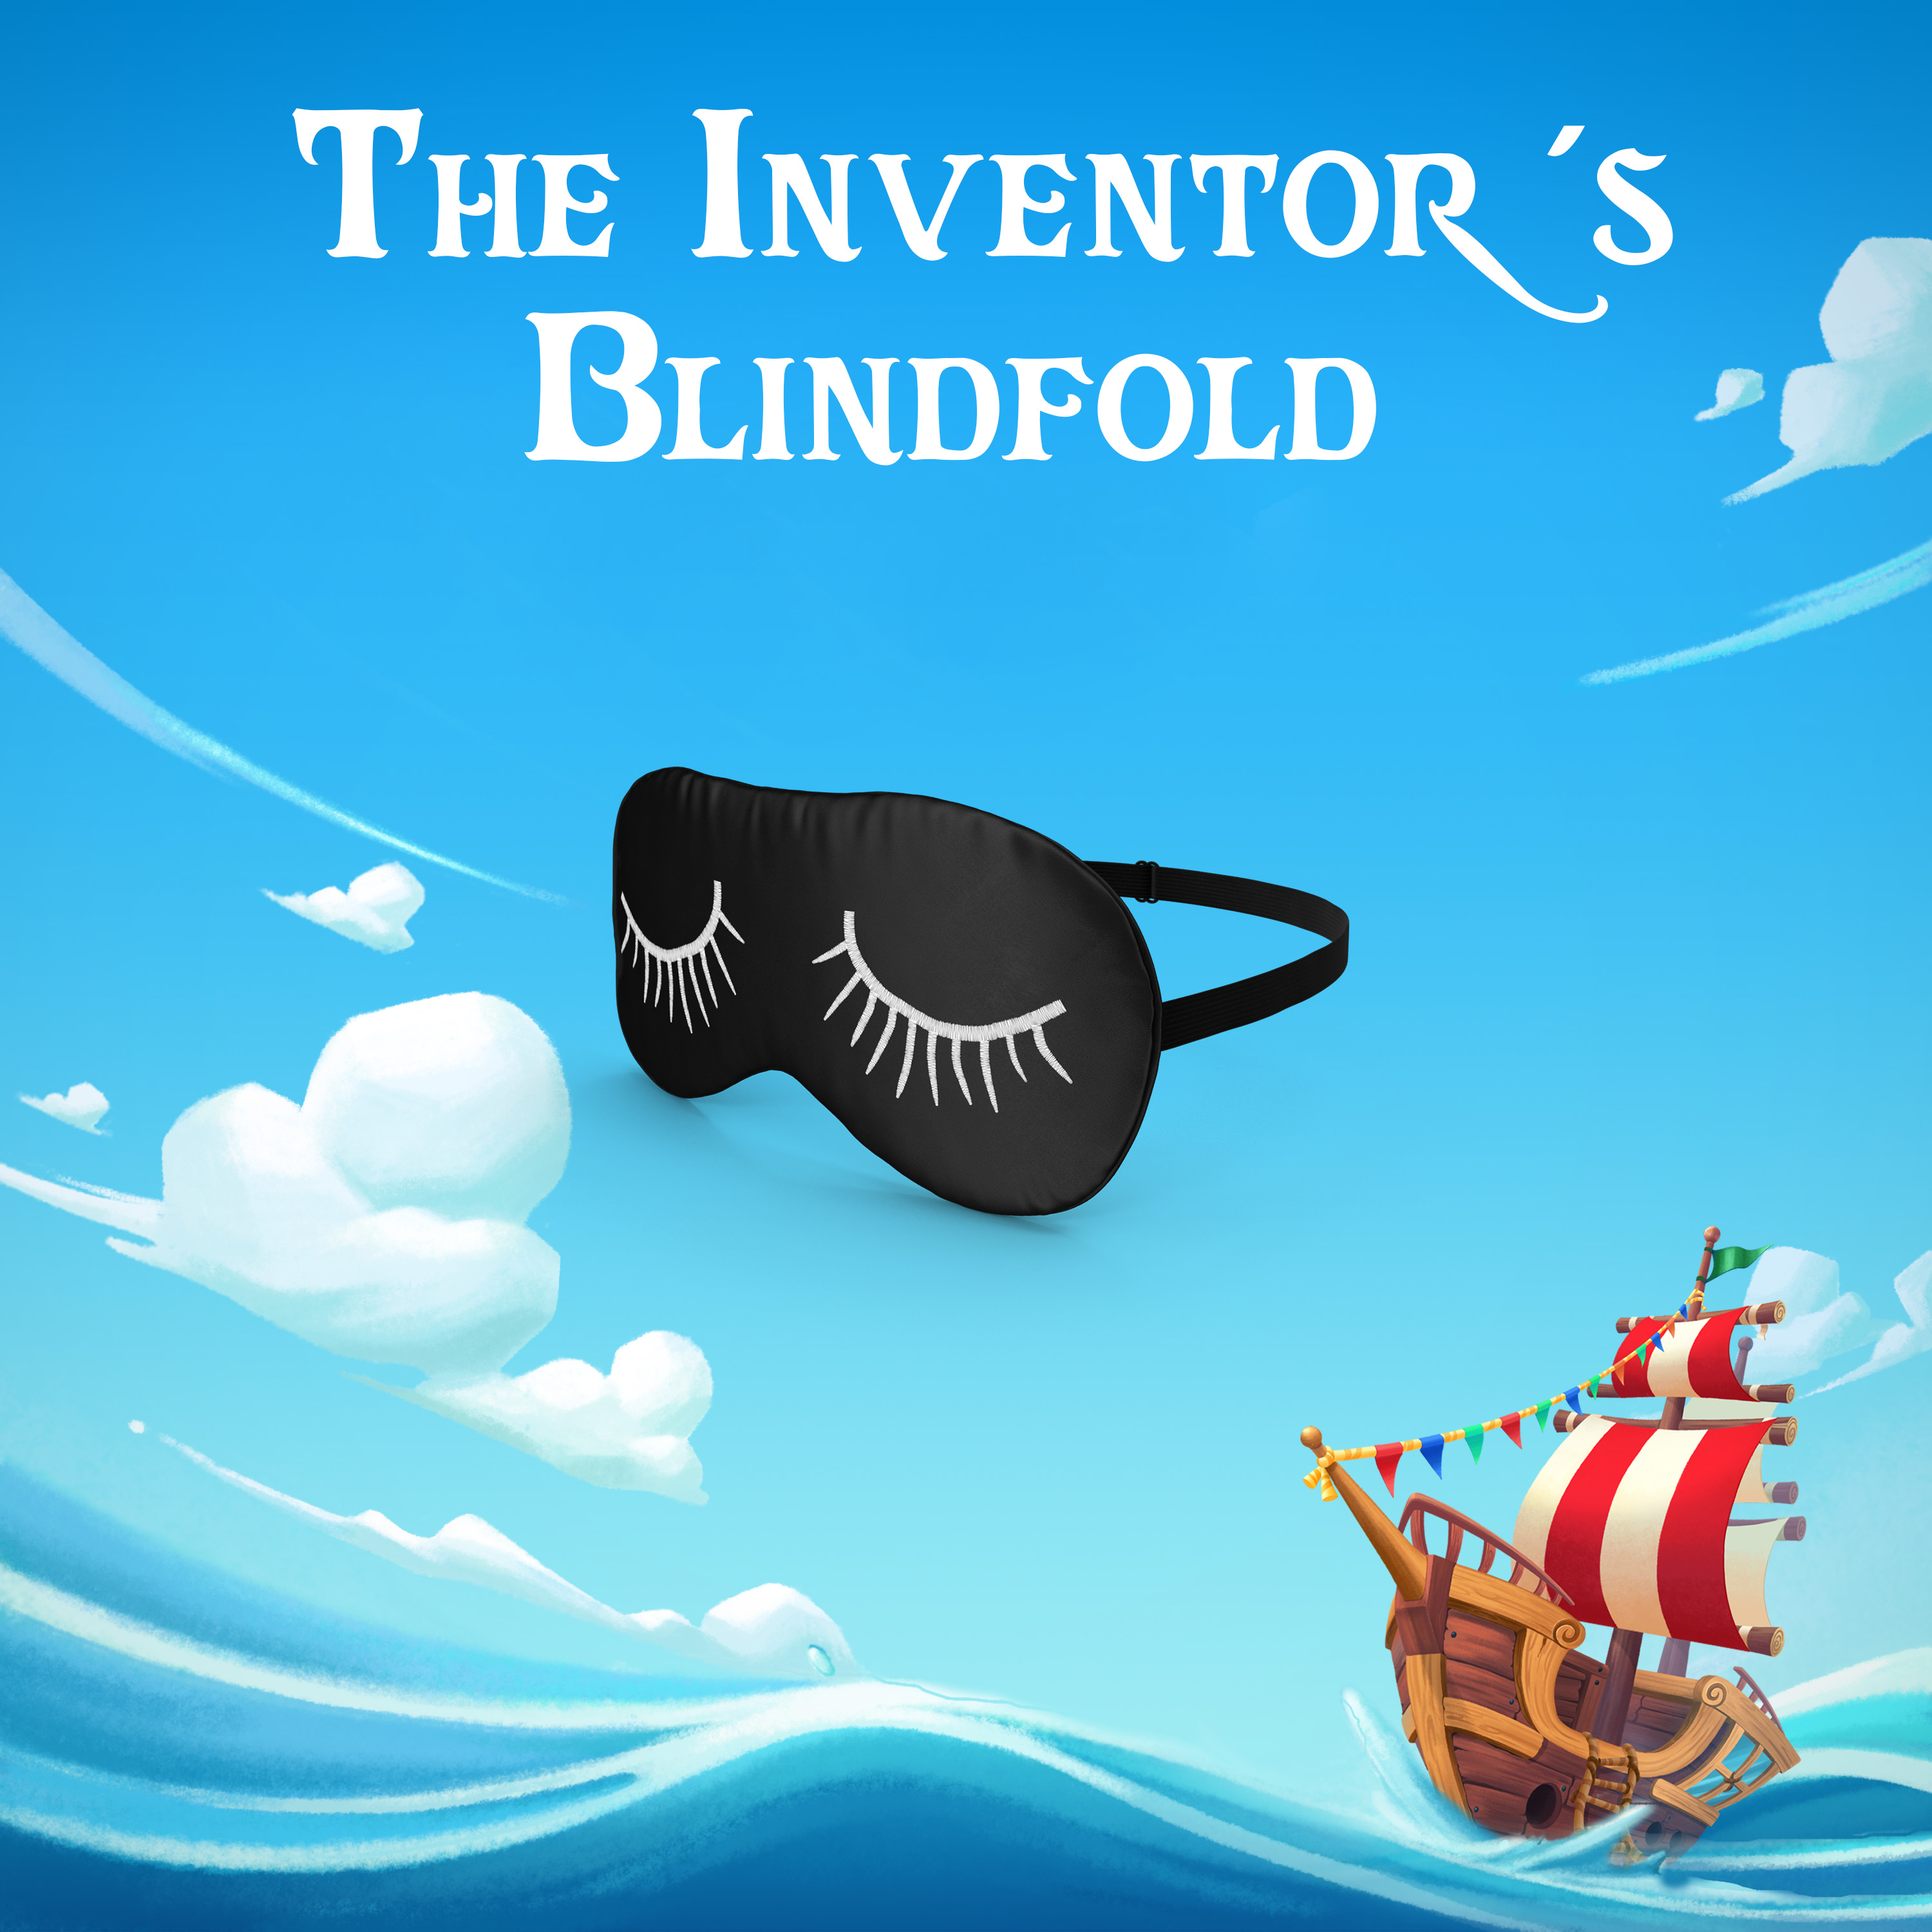 The Inventor's Blindfold